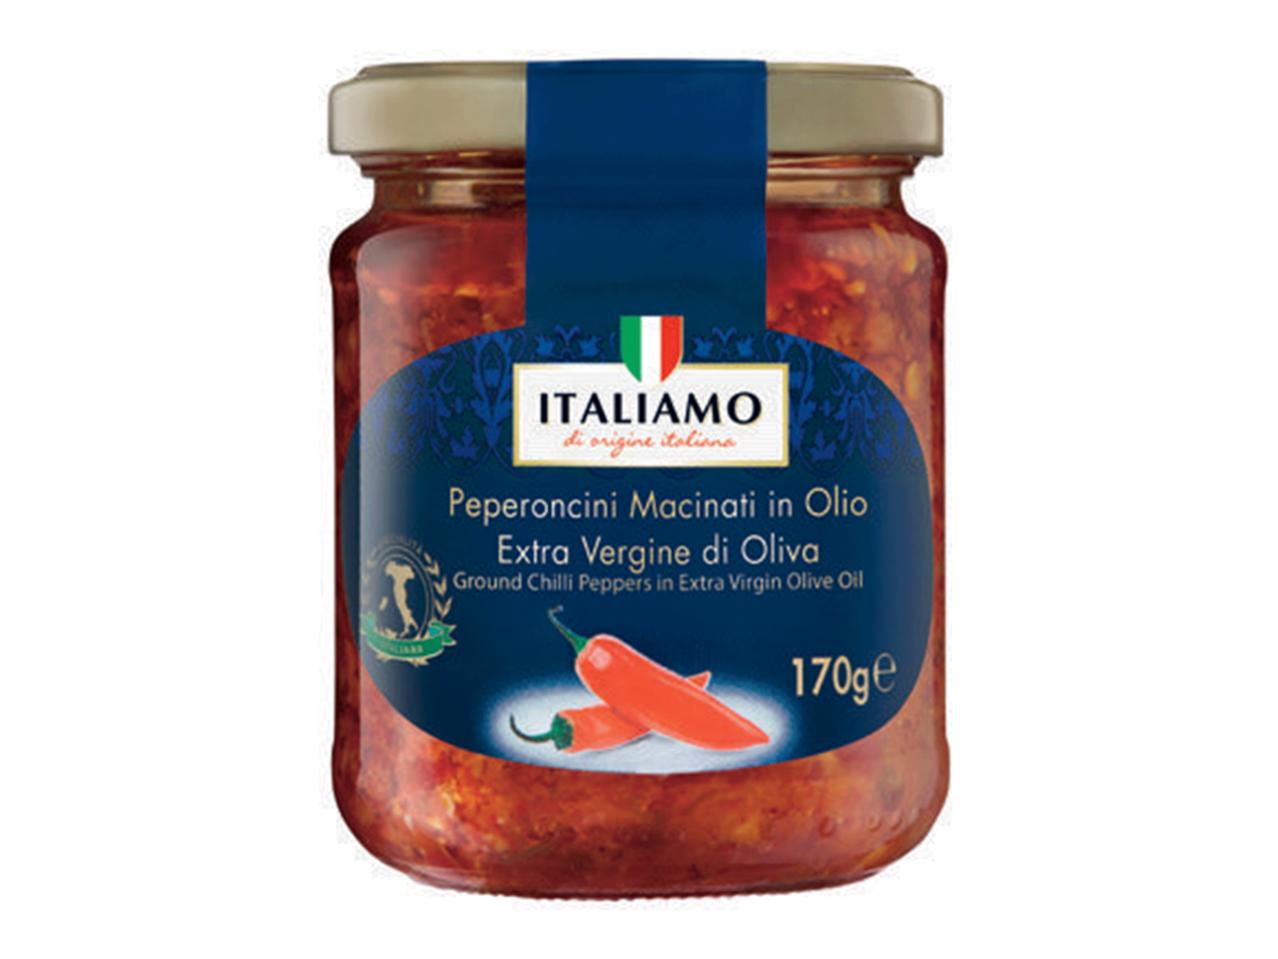 ITALIAMO Ground Chilli Peppers in Extra Virgin Olive Oil